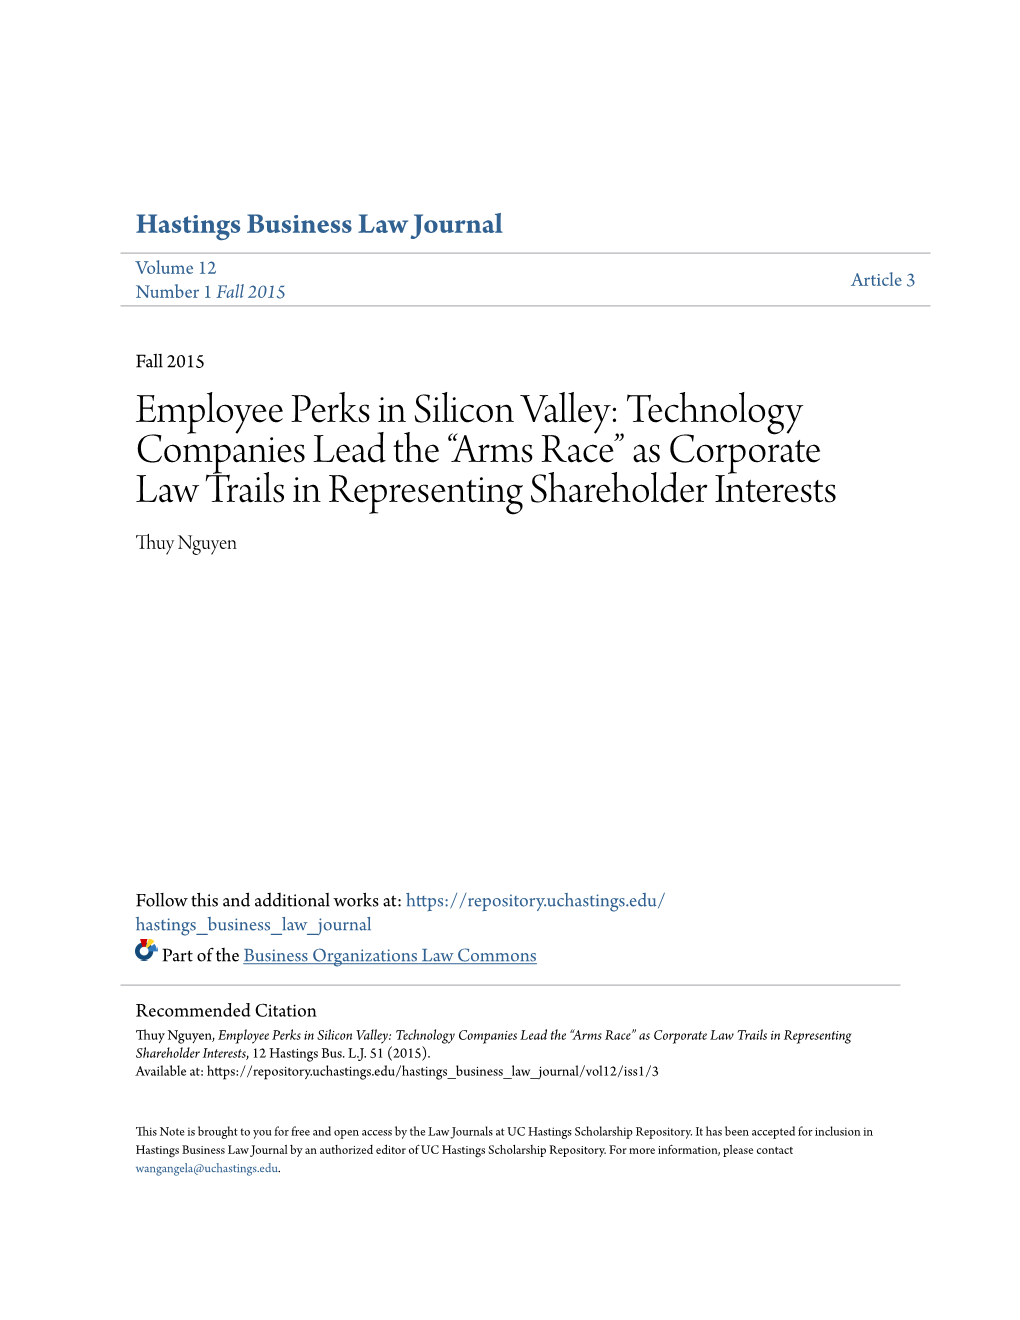 Employee Perks in Silicon Valley: Technology Companies Lead the “Arms Race” As Corporate Law Trails in Representing Shareholder Interests Thuy Nguyen